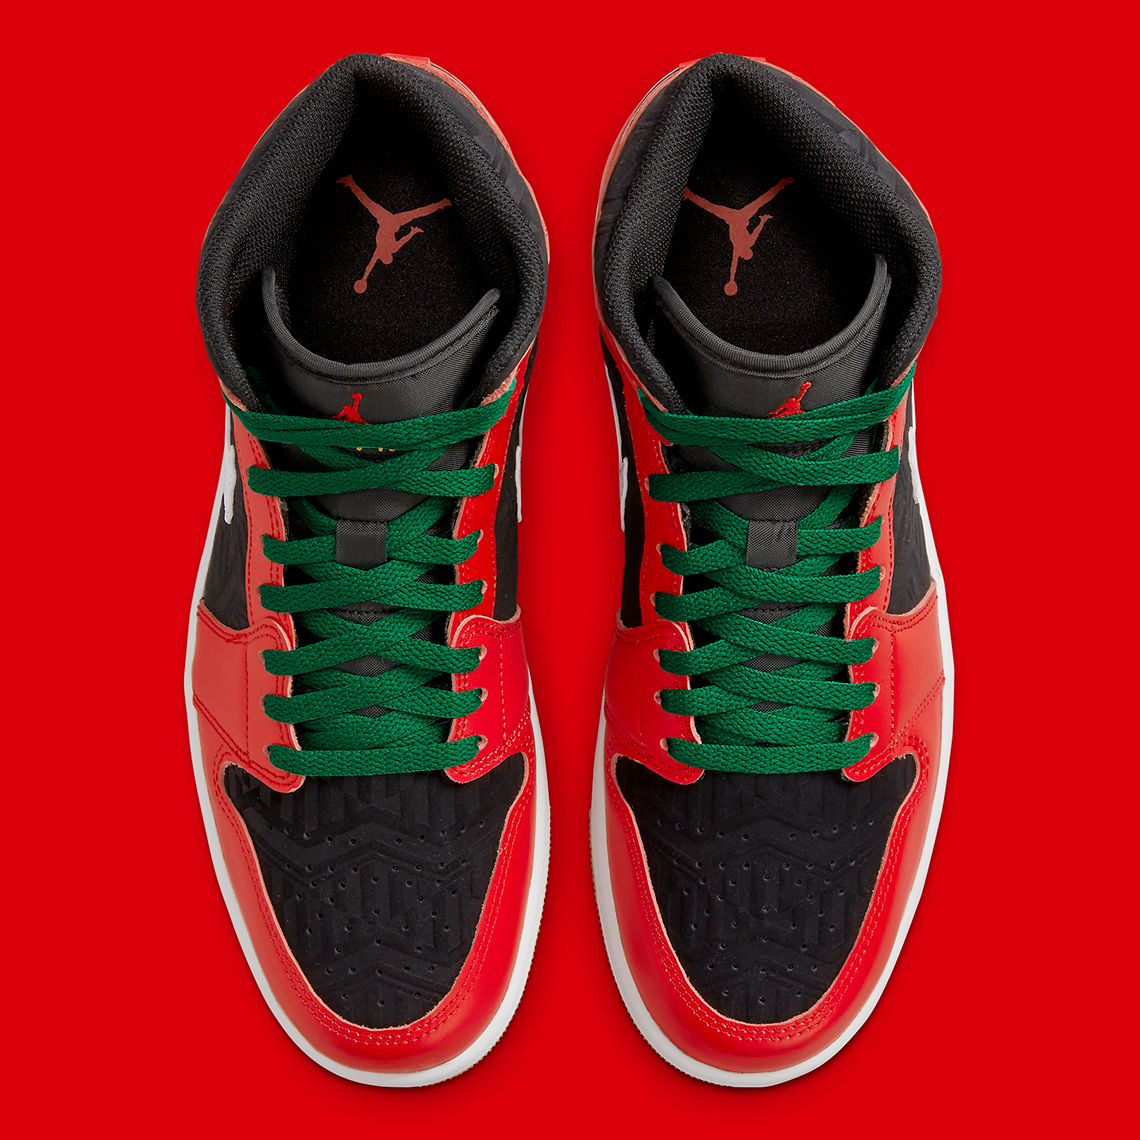 green and black jordan 1 with red laces